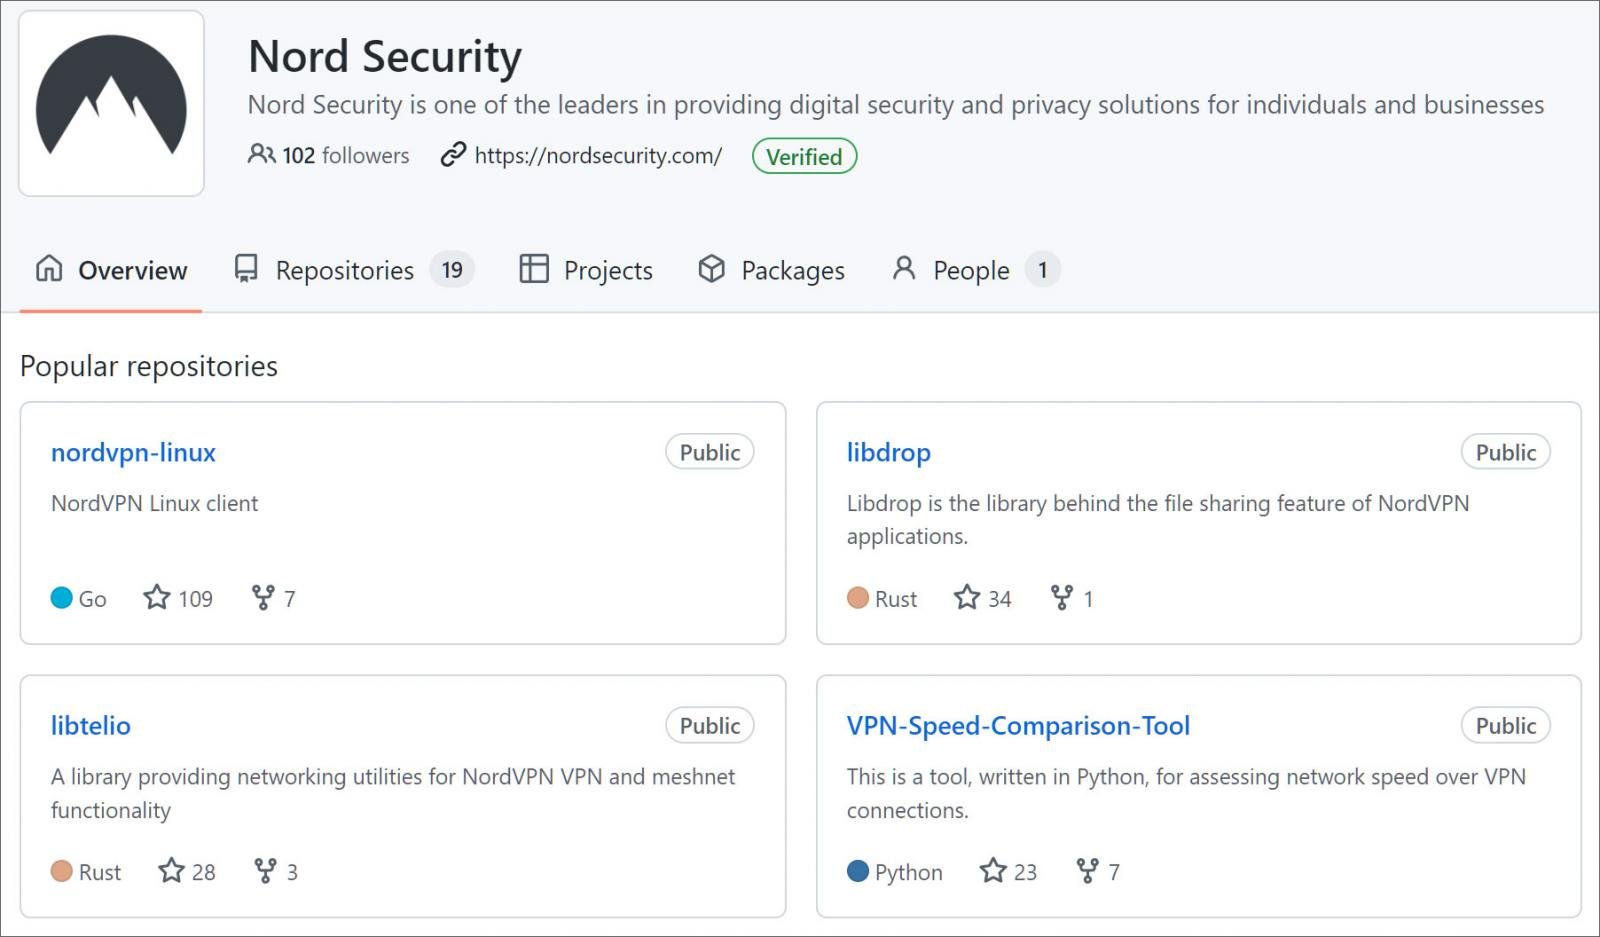 NordSecurity's GitHub page